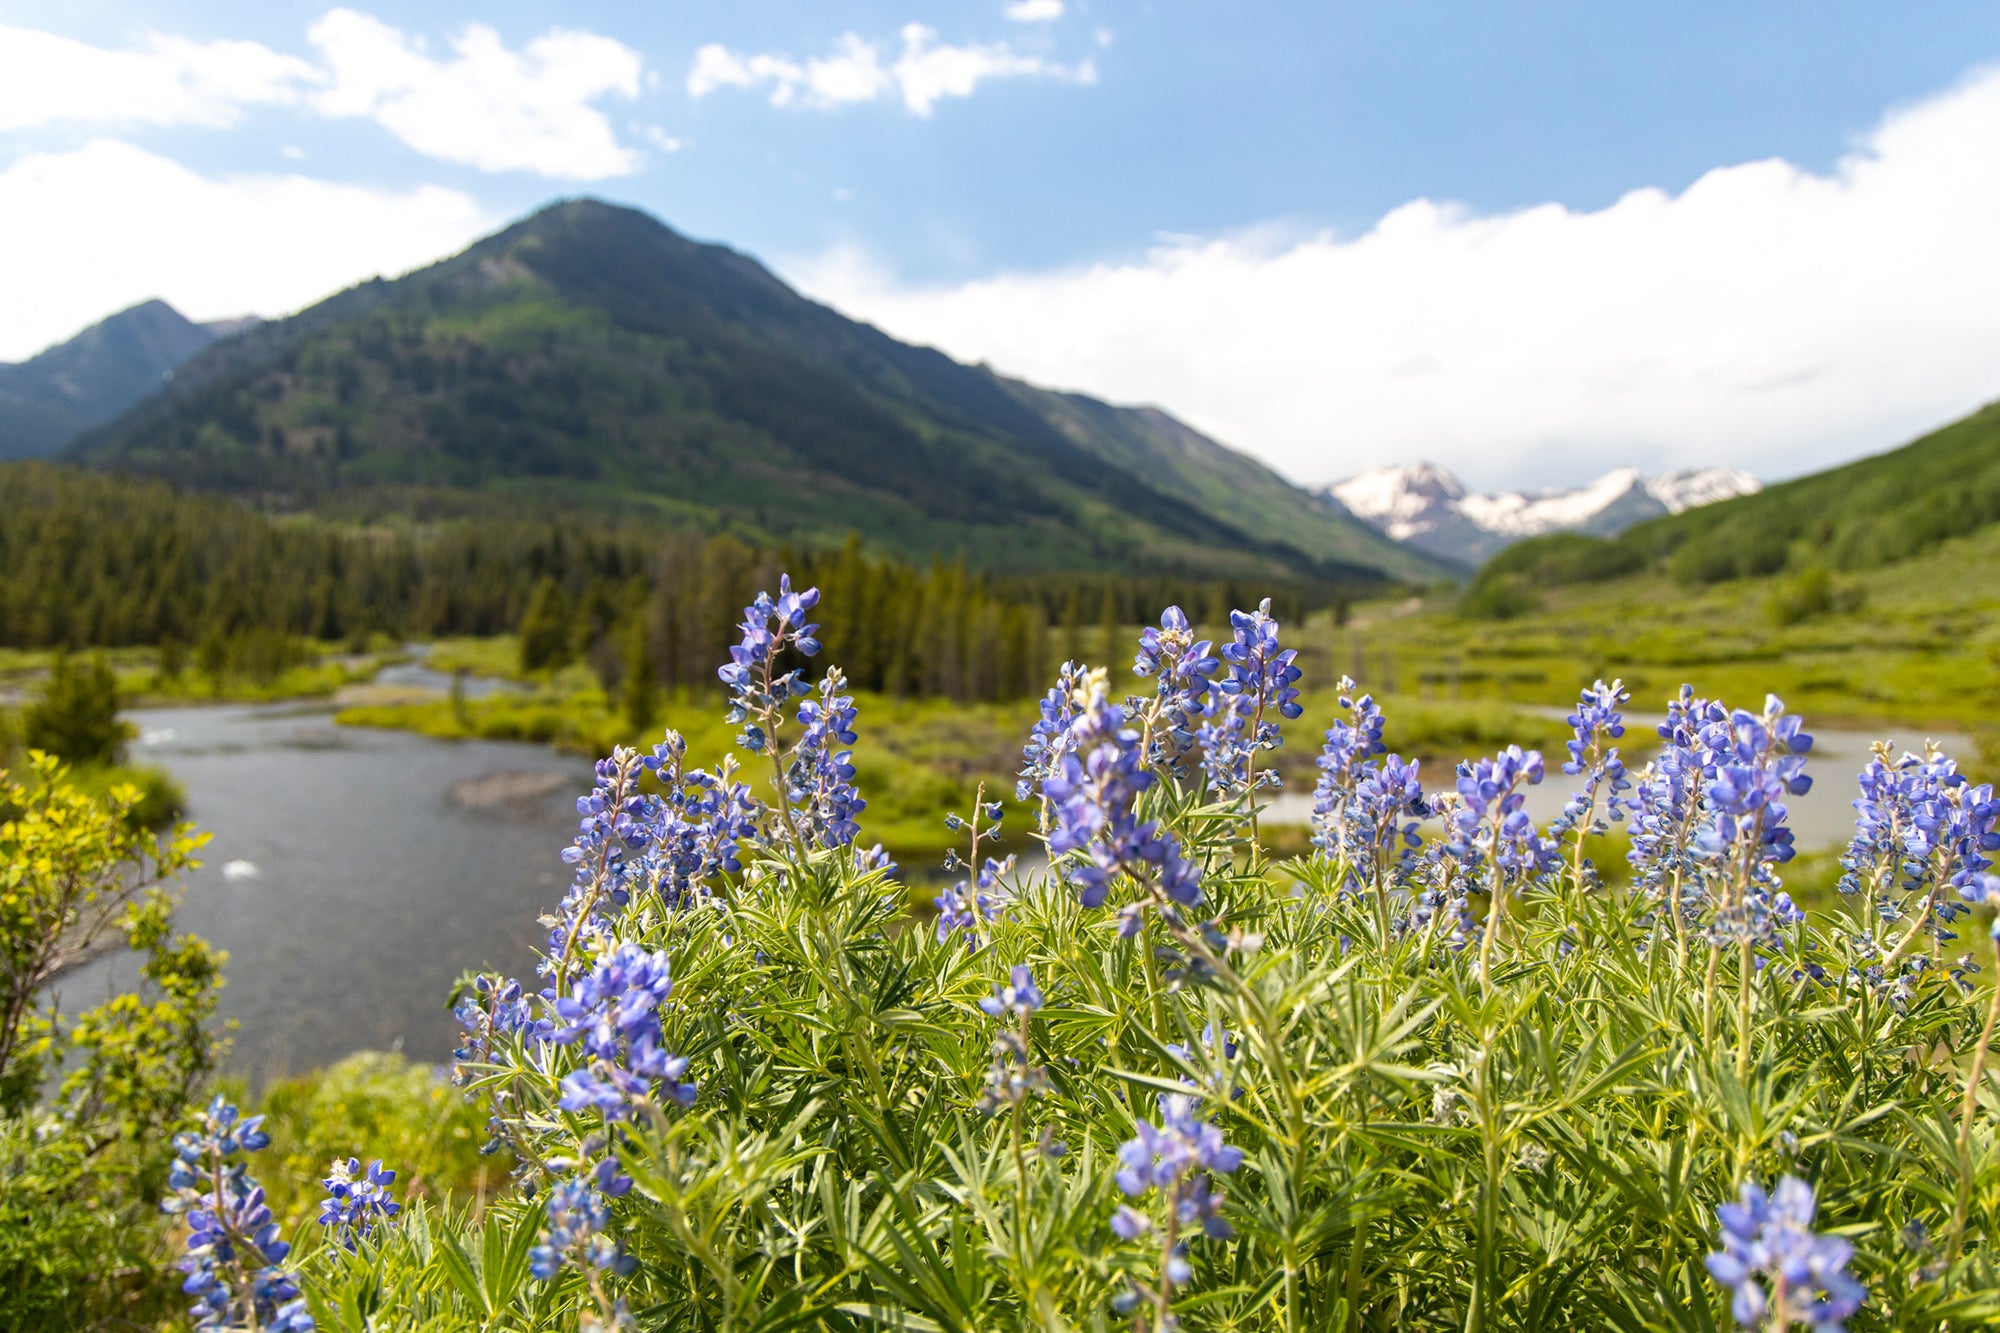 How to Volunteer in Crested Butte this Year